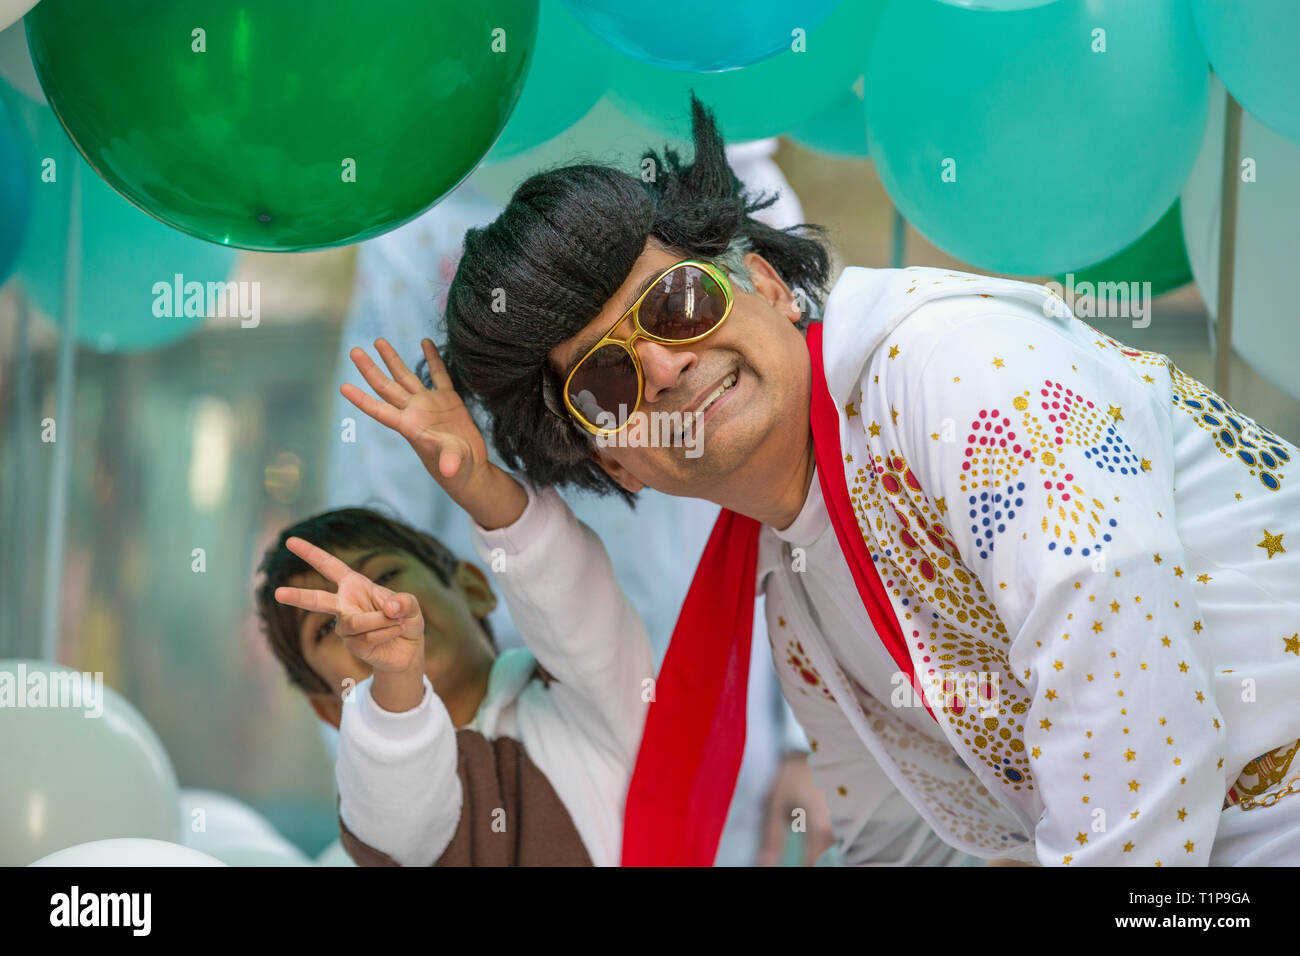 Father dressed in Elvis costume and son giving 'peace' sign participating in annual Chinese New Year Parade in San Francisco, California, USA Stock Photo